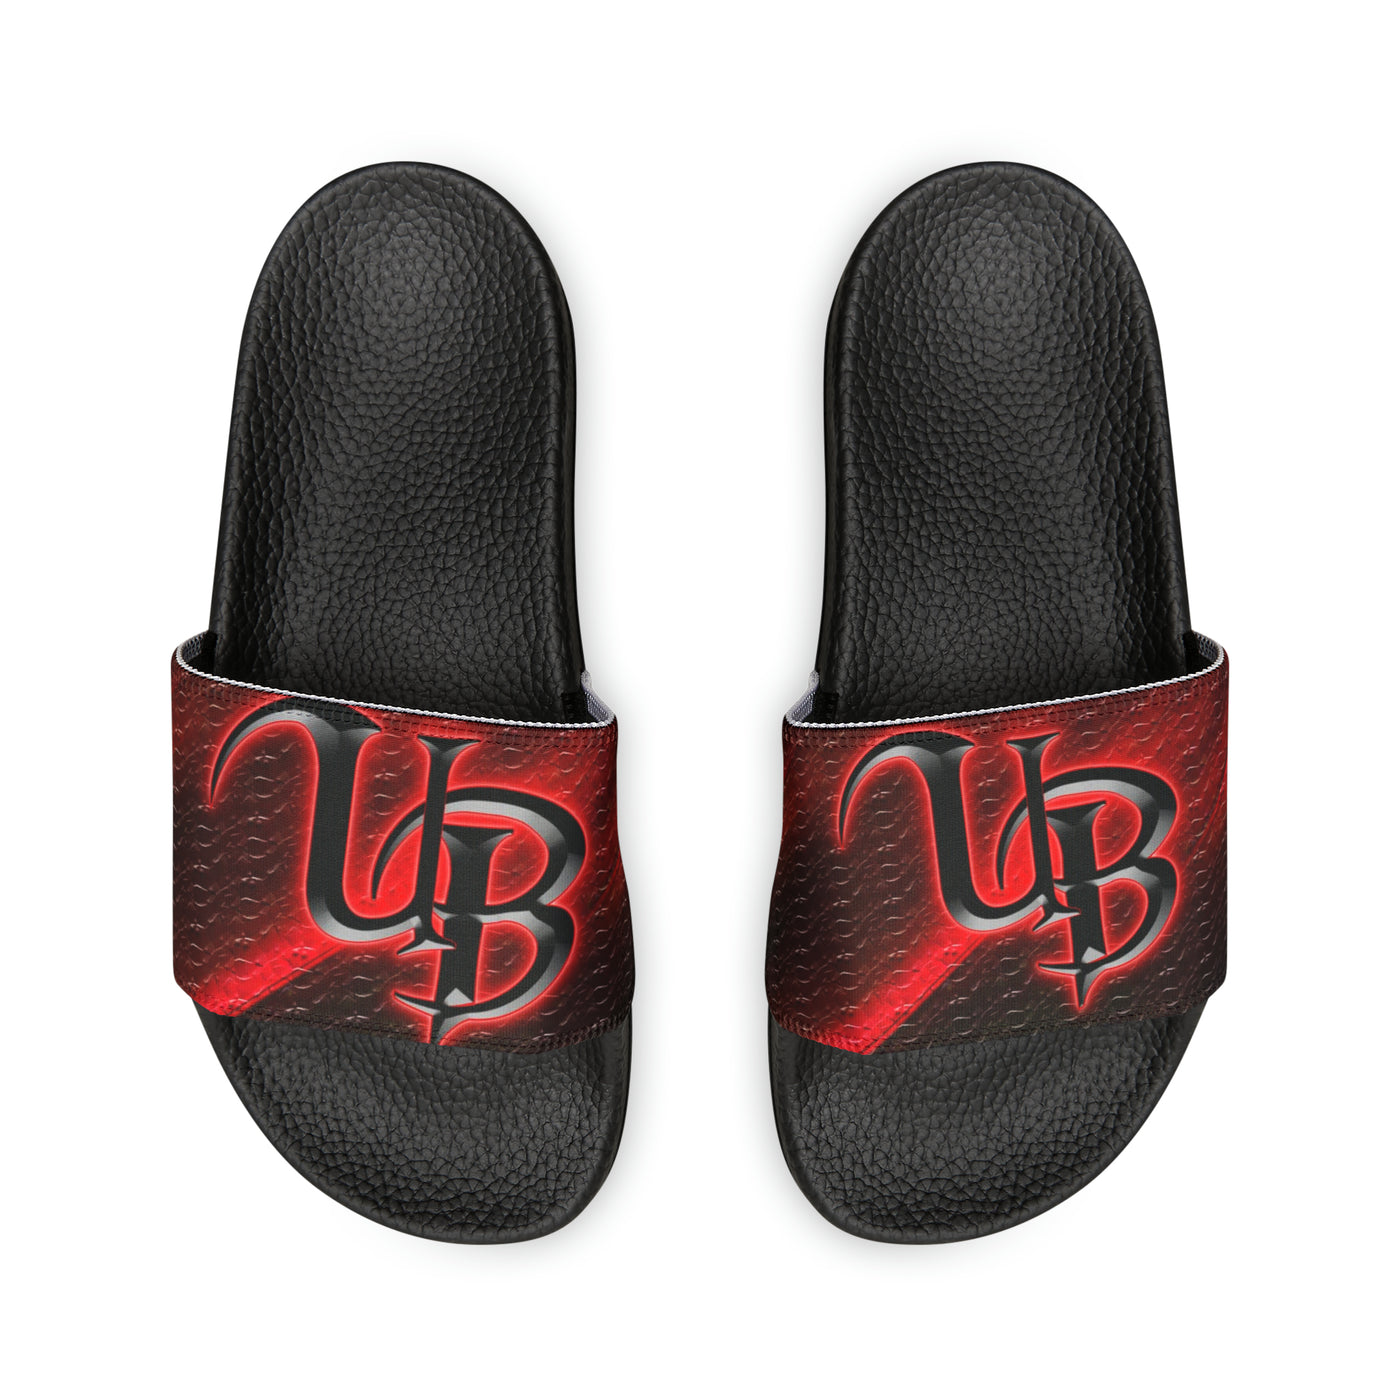 Men's PU Slide Sandals - Comfortable slide sandals for men made of PU material, suitable for casual wear or lounging, offering ease and comfort